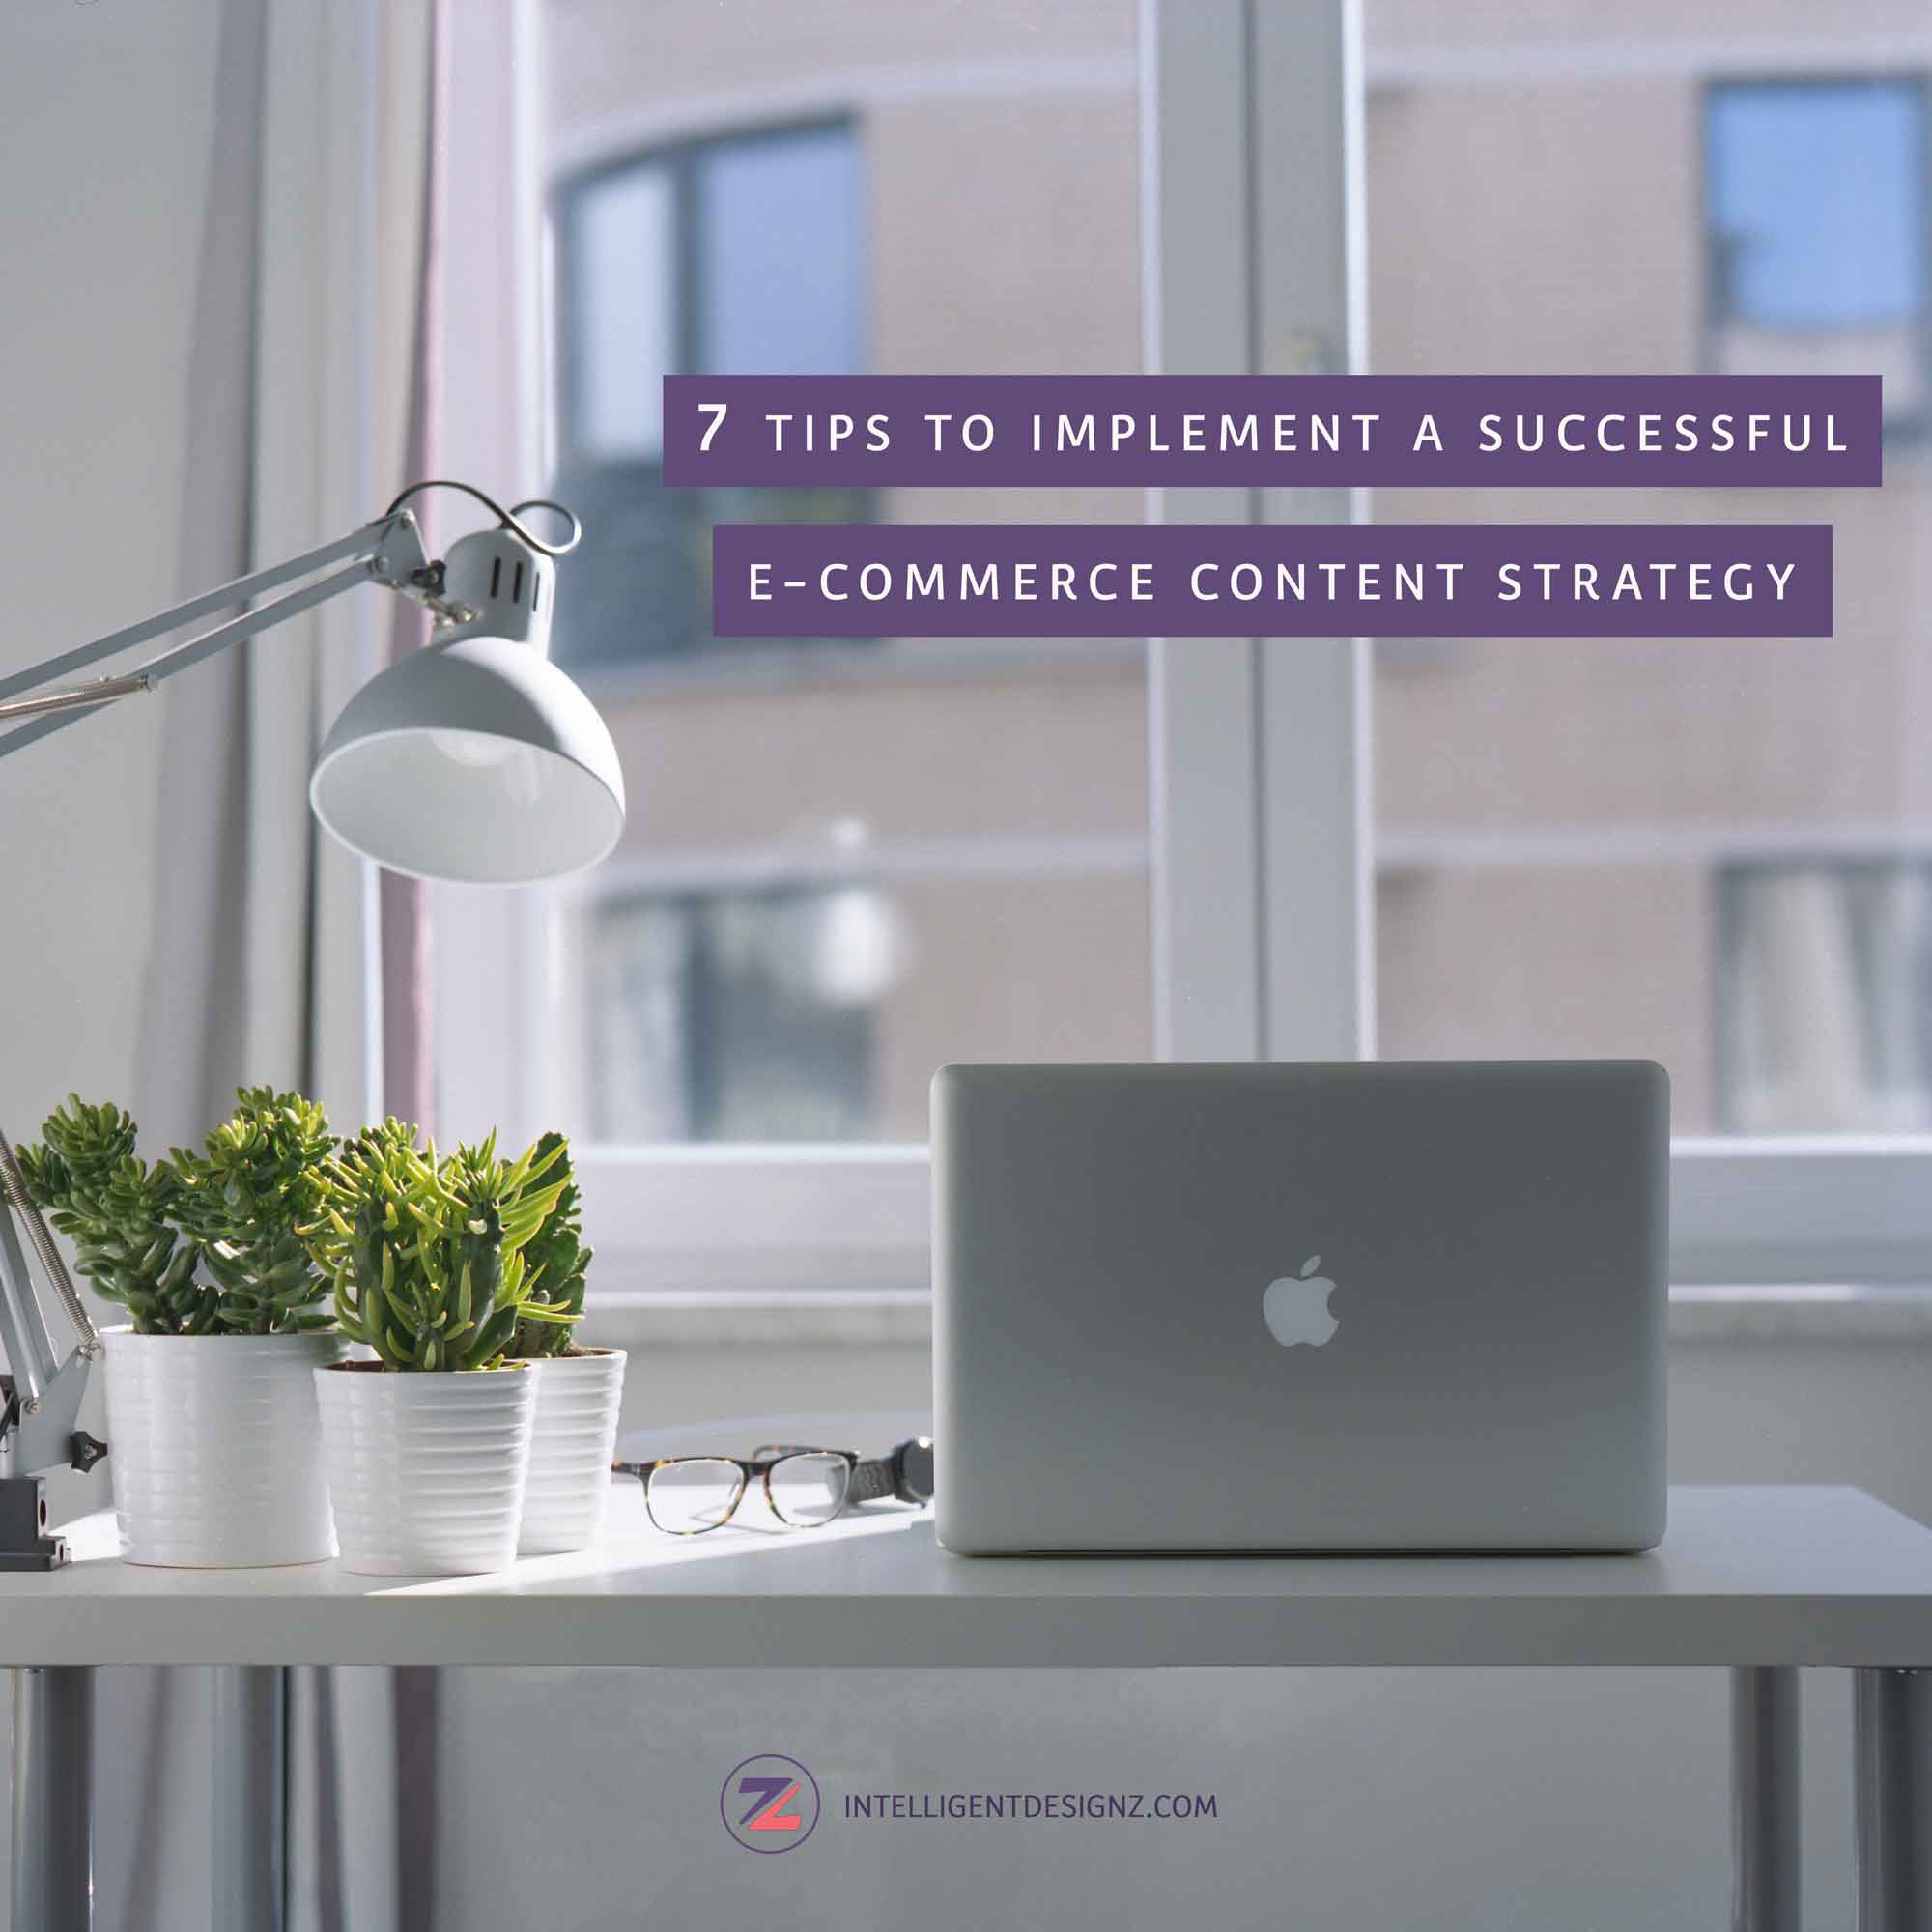 7 Tips To implement A Successful E-commerce Content Strategy